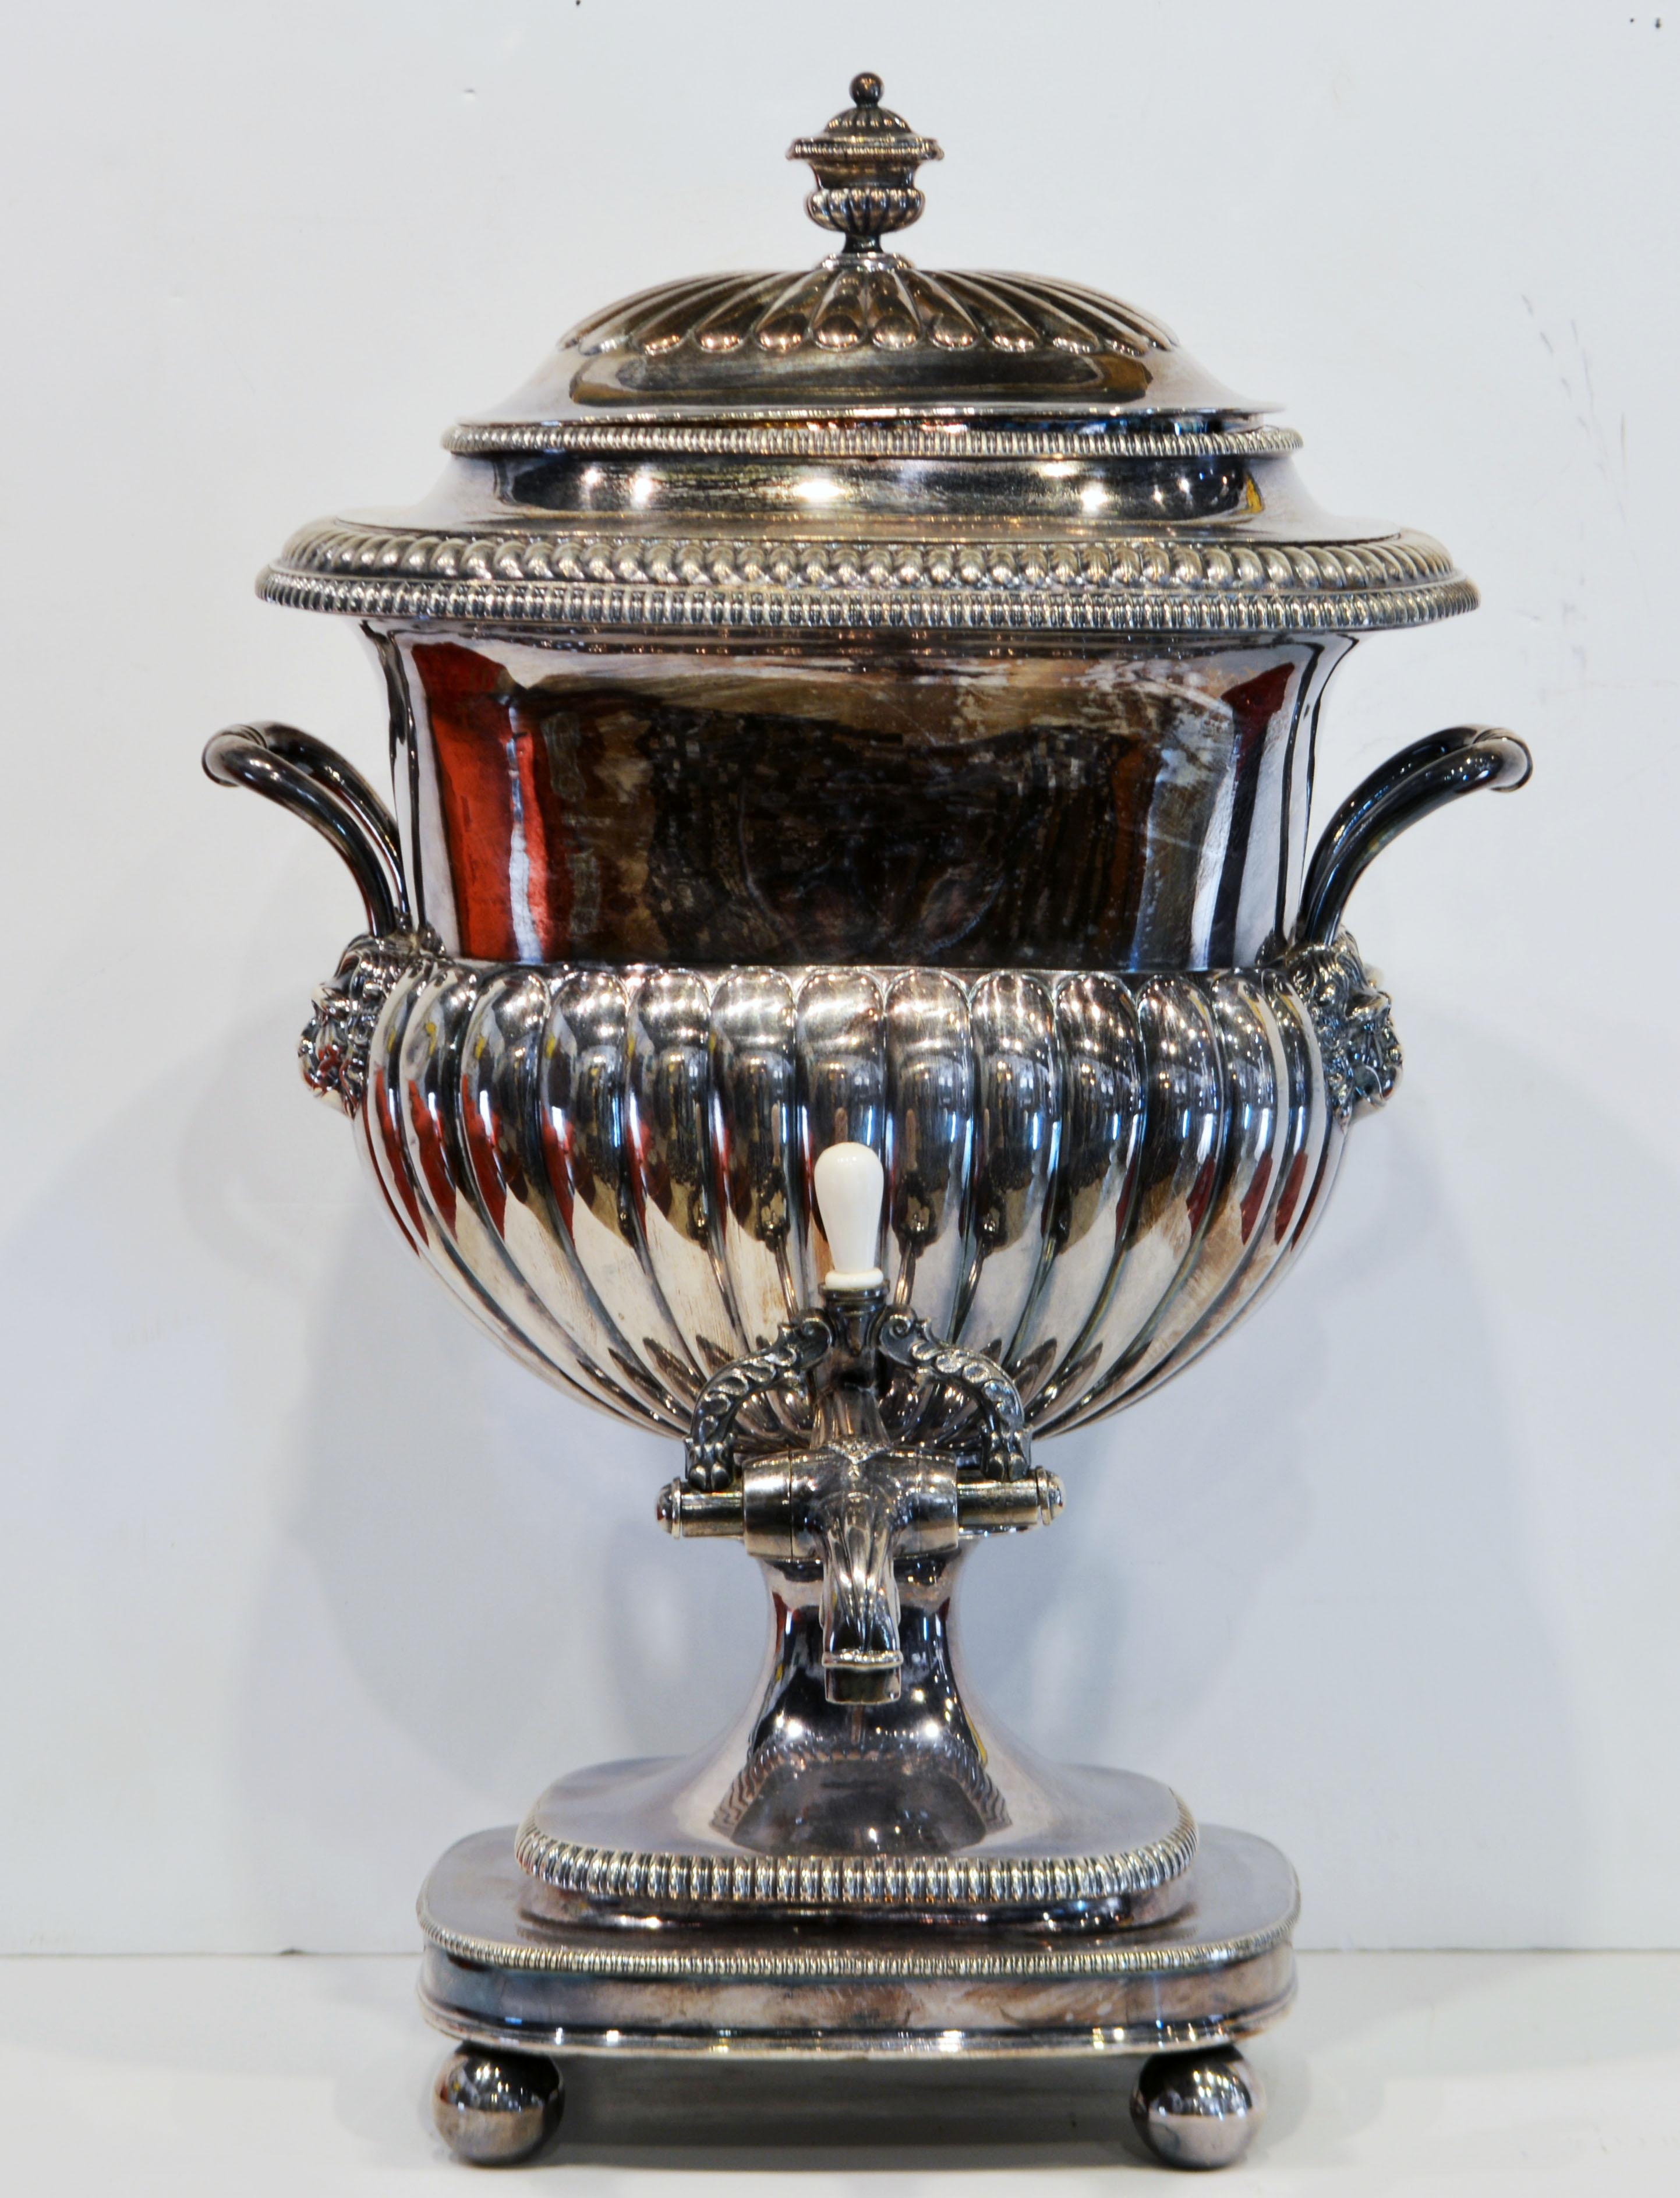 This regency Old Sheffield silver on copper tea urn features a half fluted lid with urn shaped finial, handles adorned with lion heads, polished bone tap handle, gadroon borders and a half fluted body and gadroon borders resting on four ball